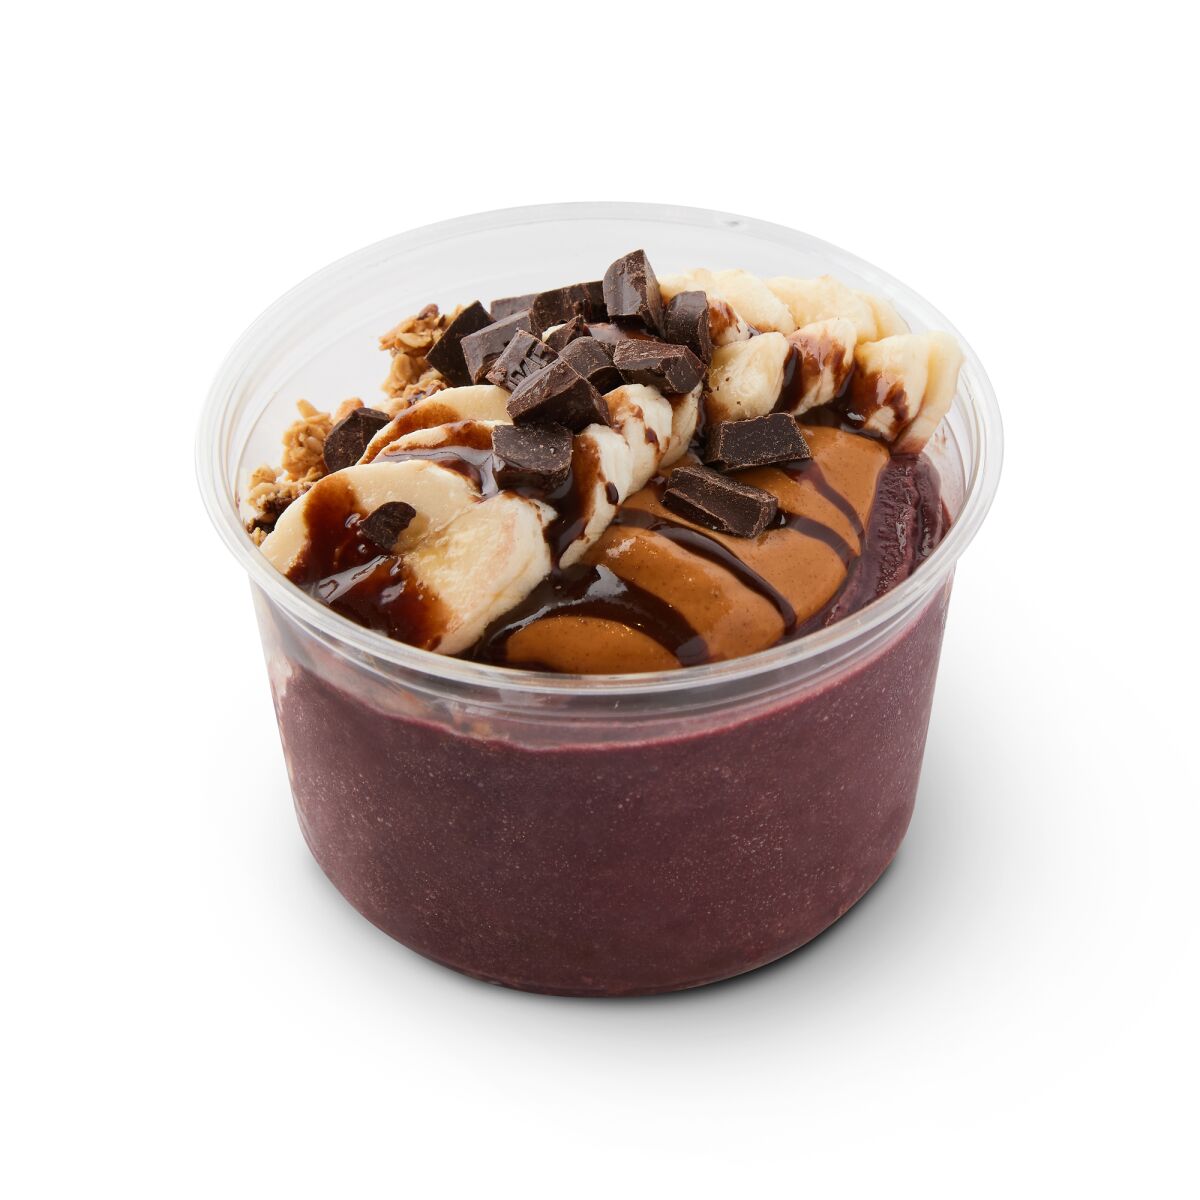 Sambazon, new at Petco Park in 2022, will be serving plant-based acai bowls like this chocolate peanut butter specialty.